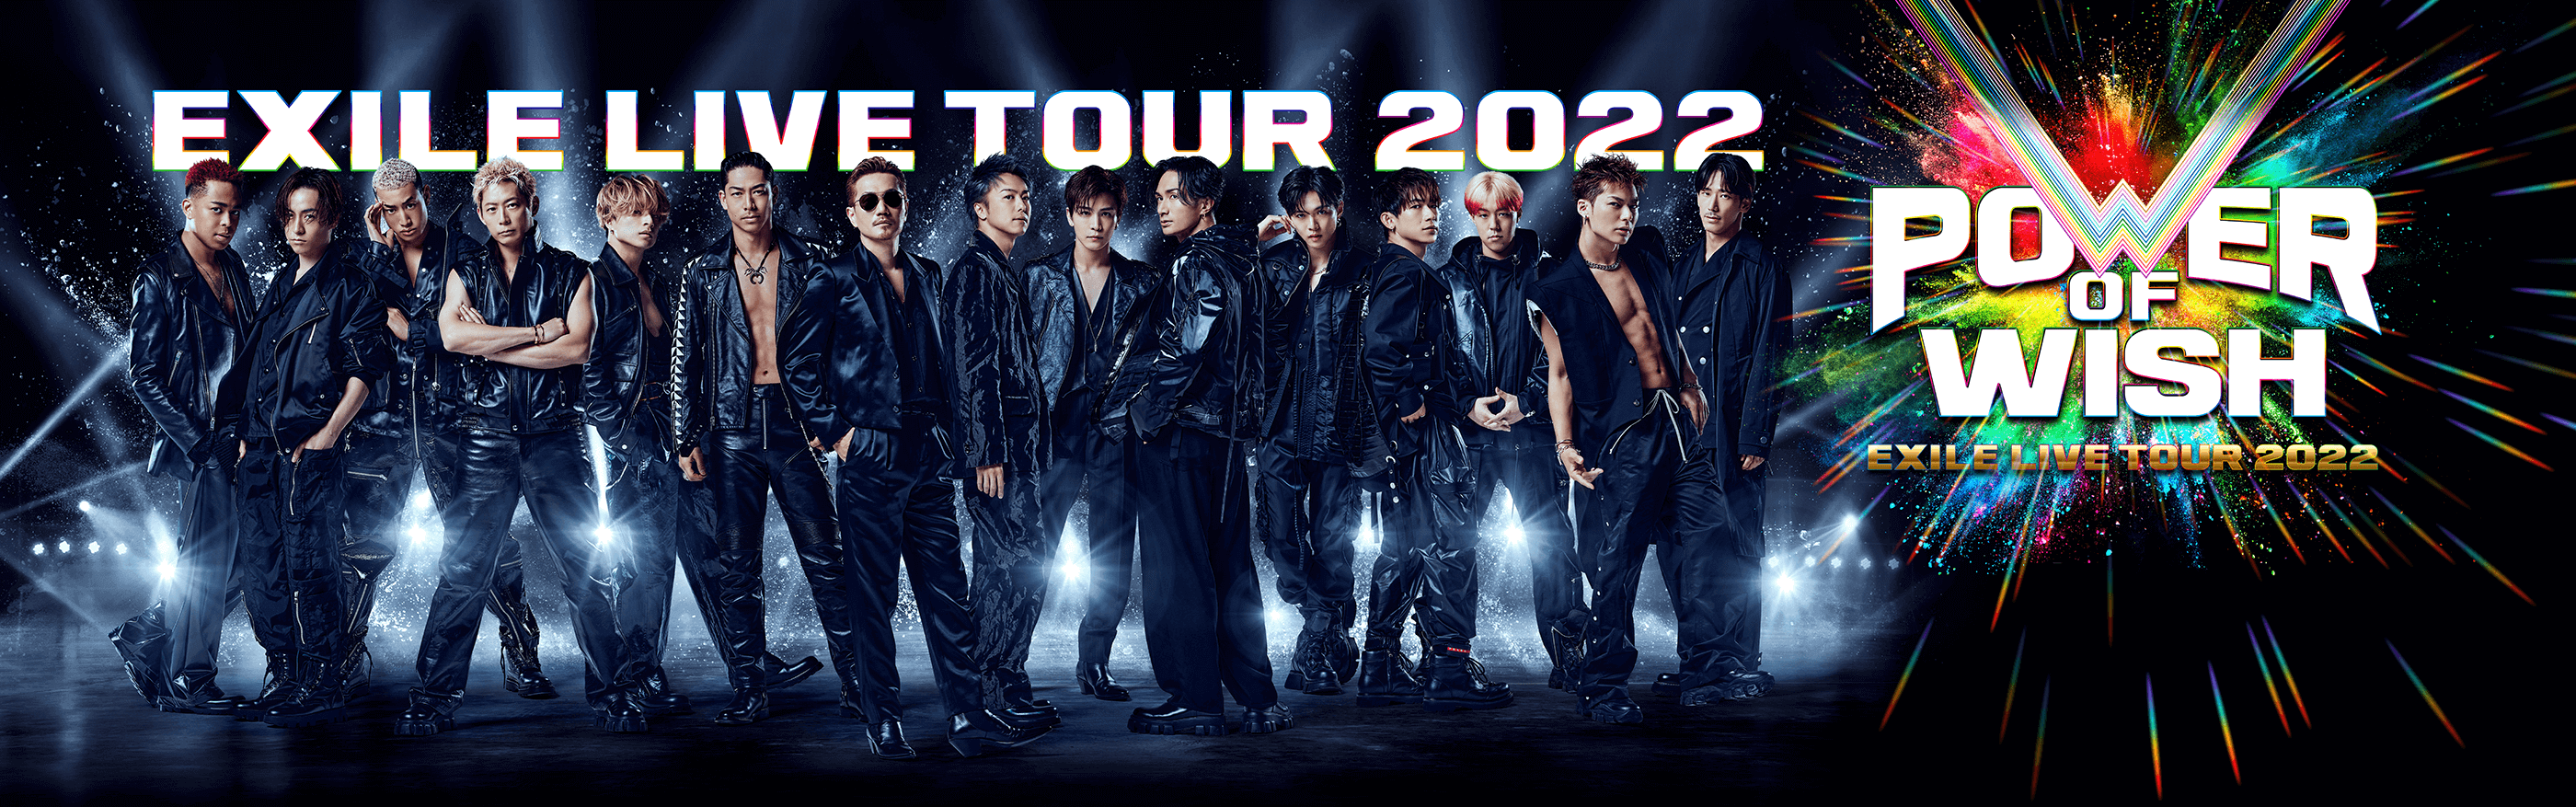 EXILE LIVE TOUR 2022 POWER OF WISH